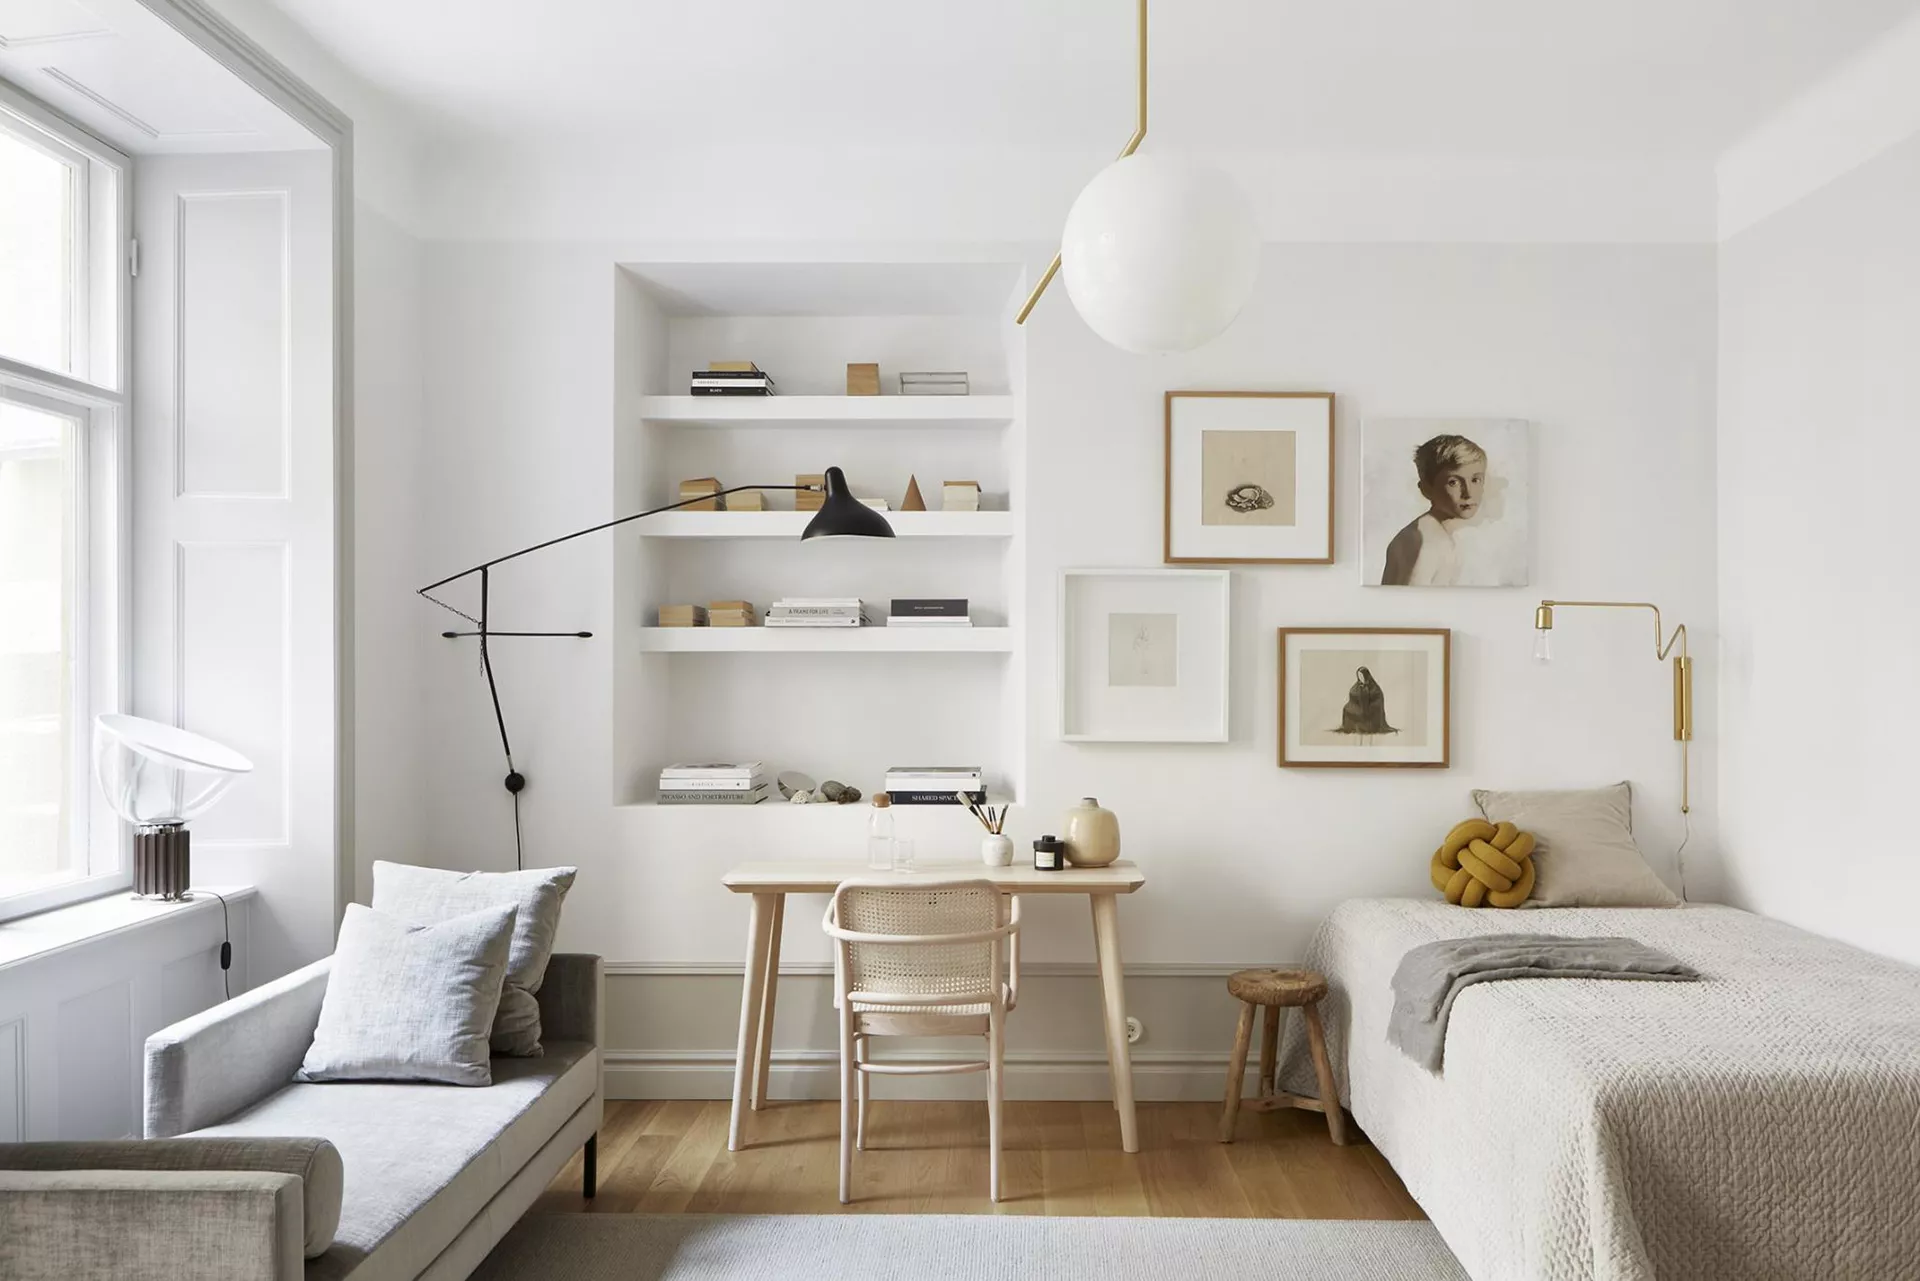 5 Storage Solutions for Small Apartments